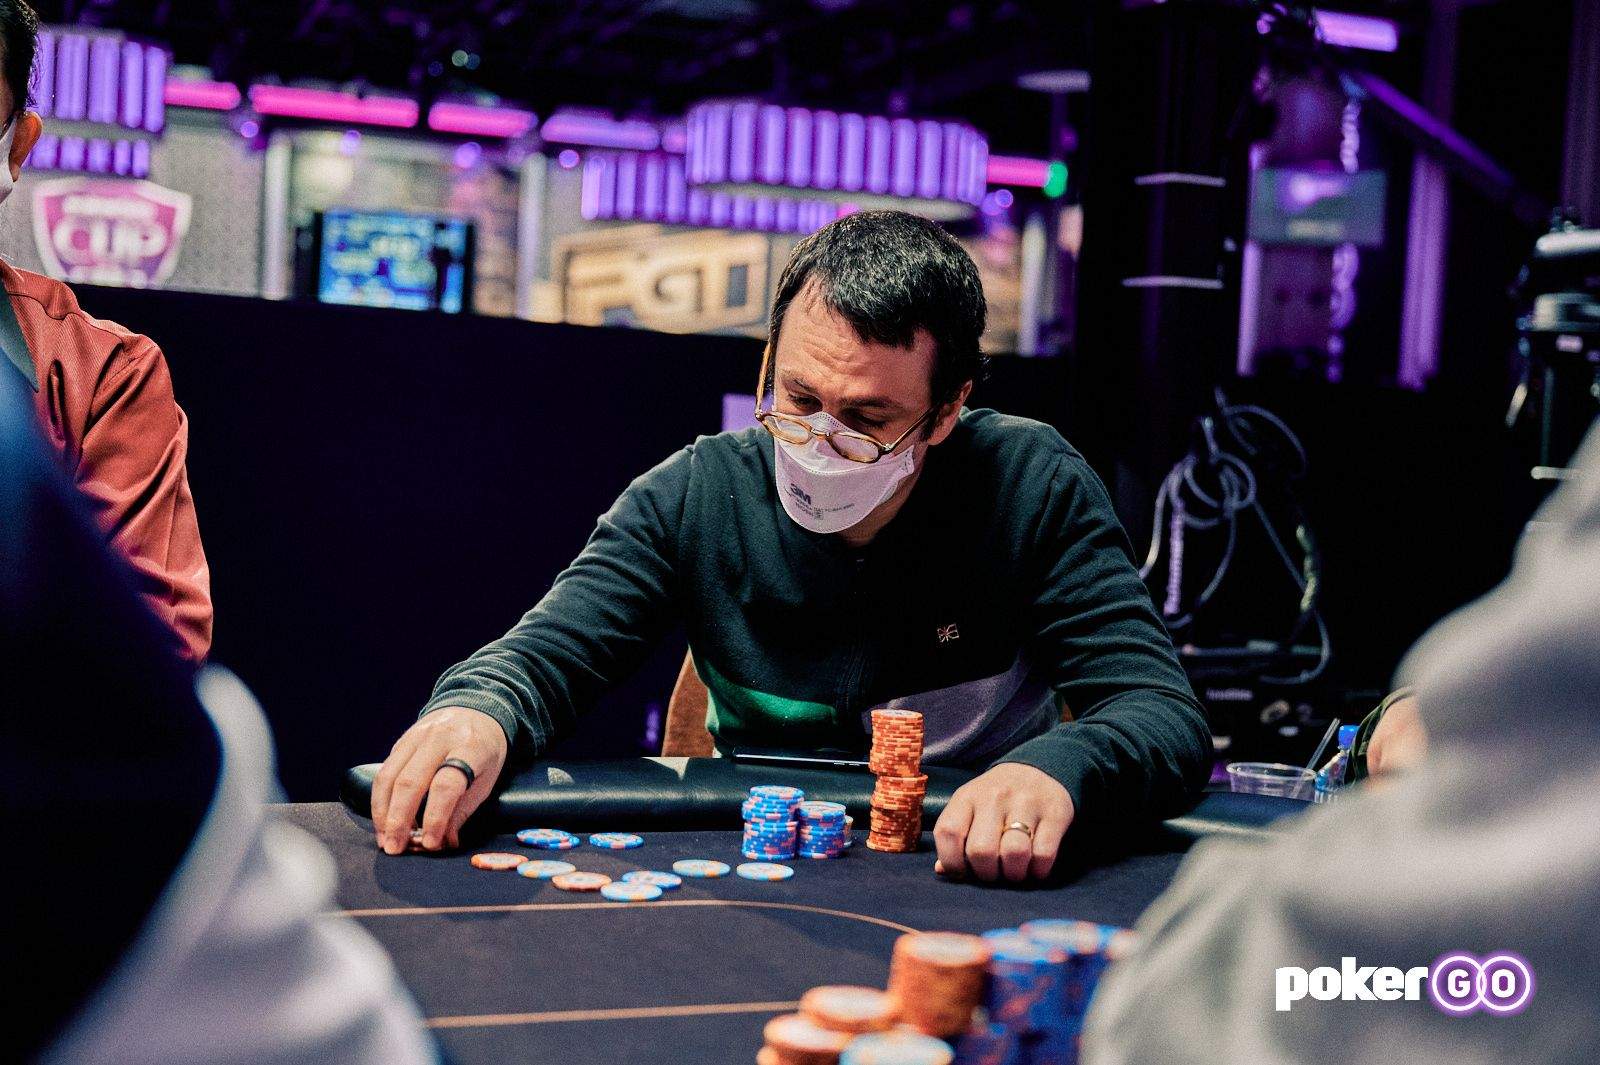 Haxton Leads PokerGO Cup Event #8 Final Table; Katz, Colpoys, and Winter Still in Contention for Series Title